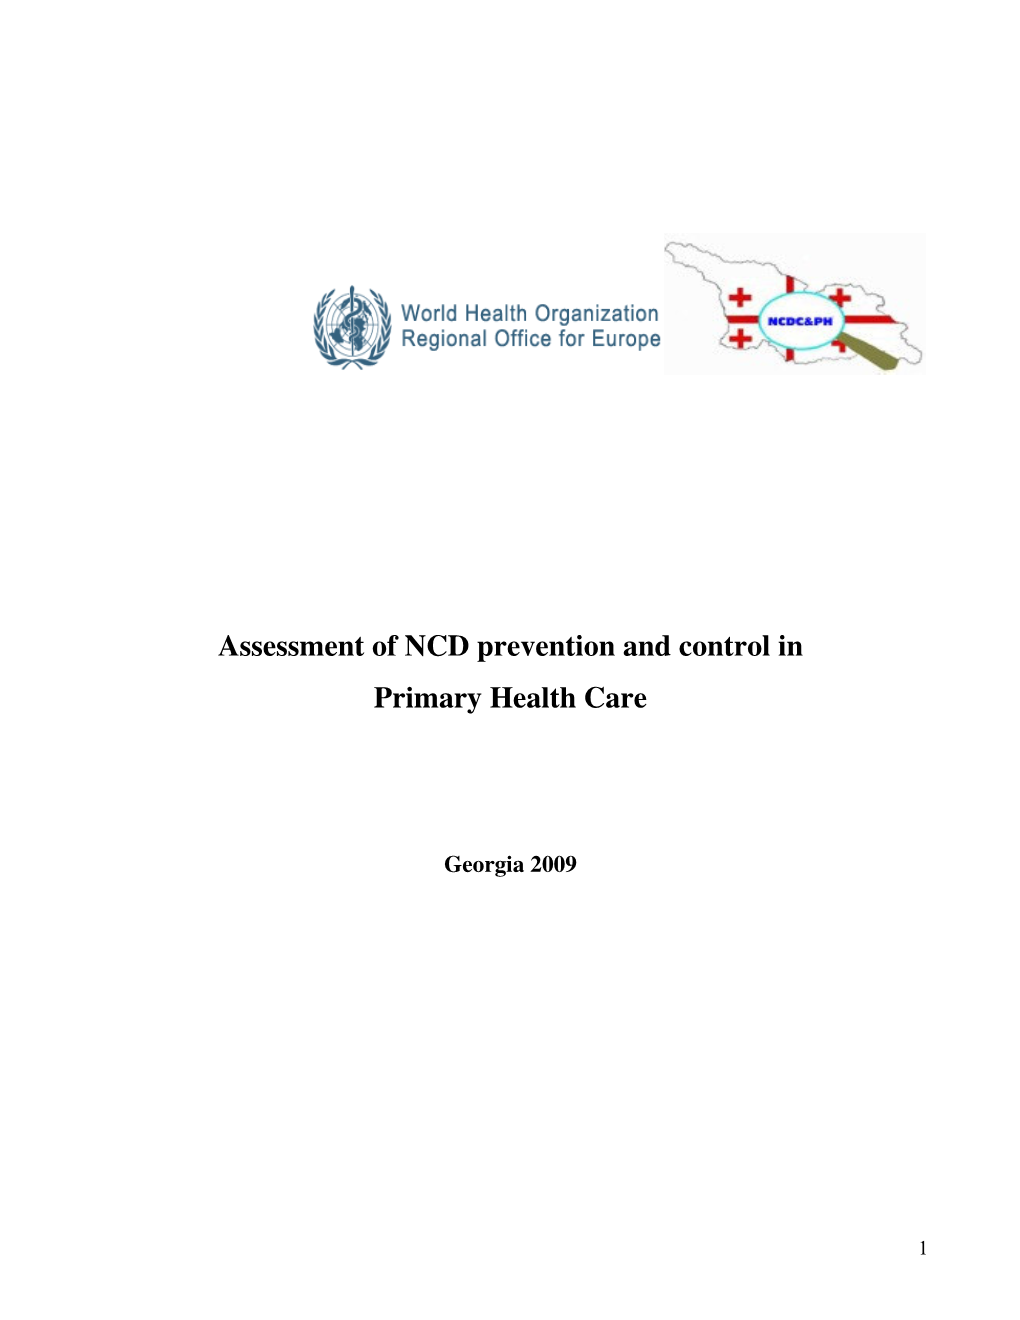 Assessment of NCD Prevention and Control in Primary Health Care